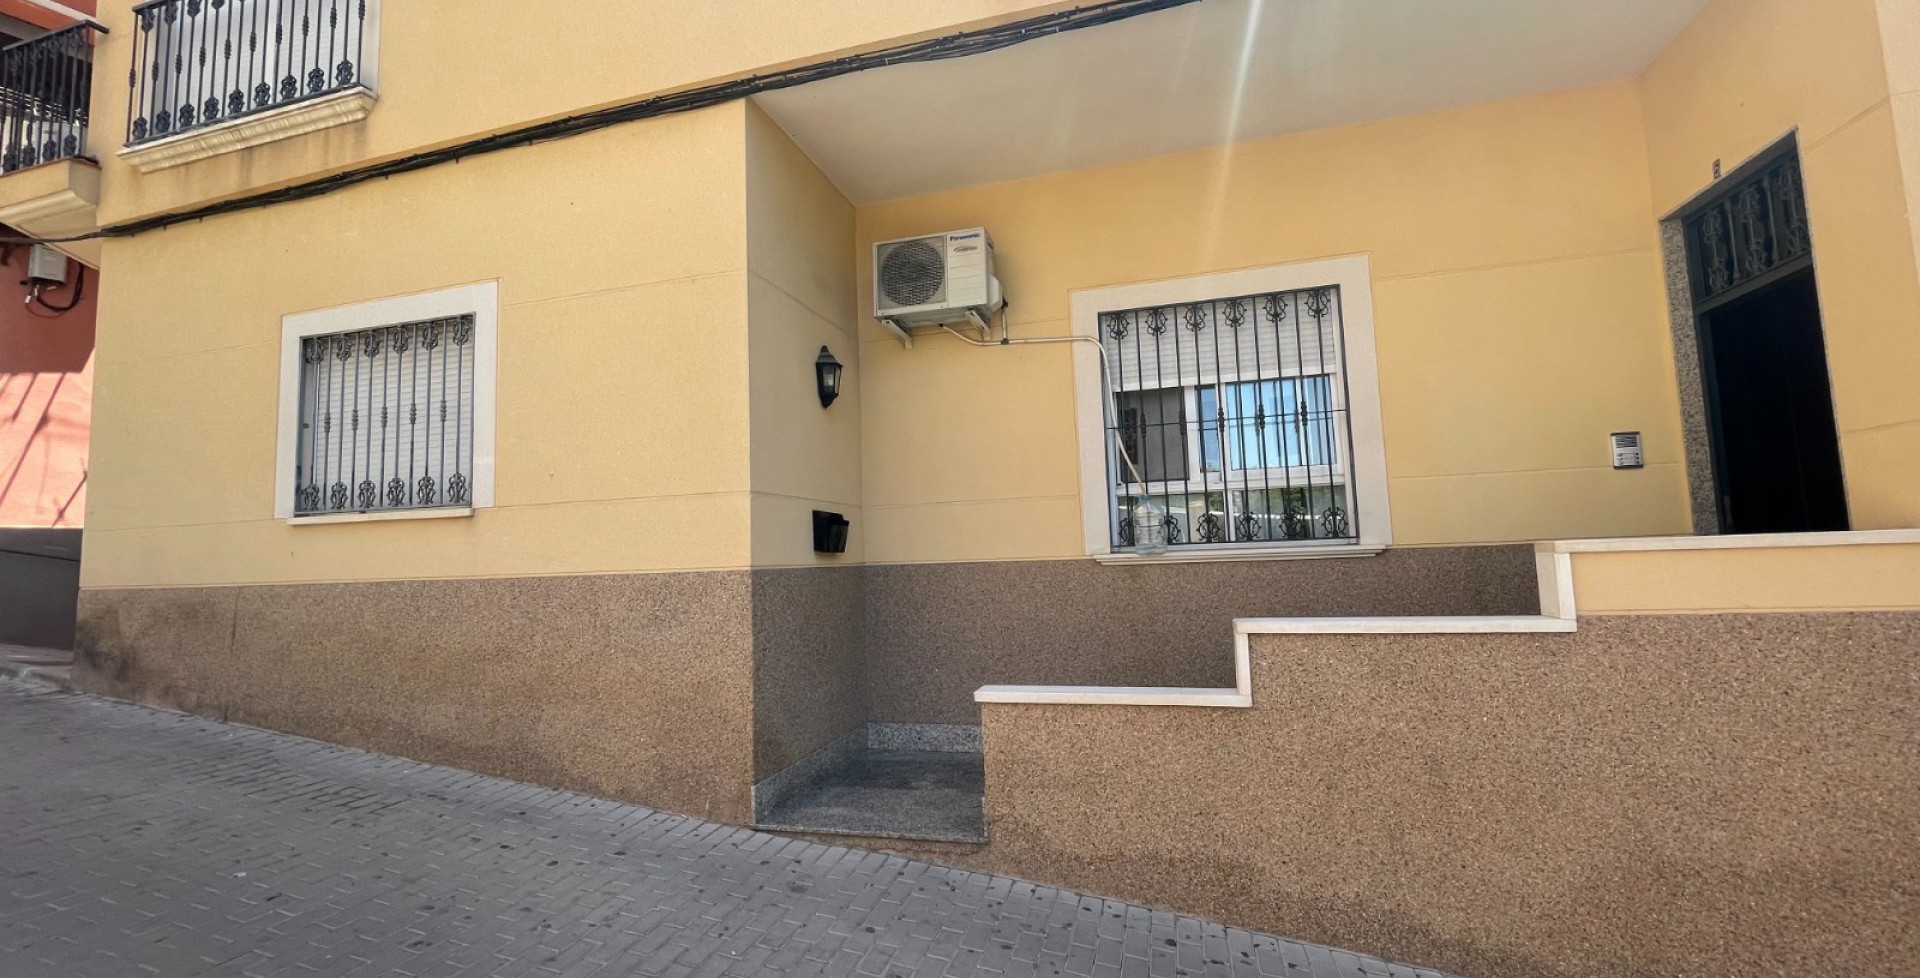 Large town centre apartment with 3 bedrooms, Blanca, Murcia, Spain